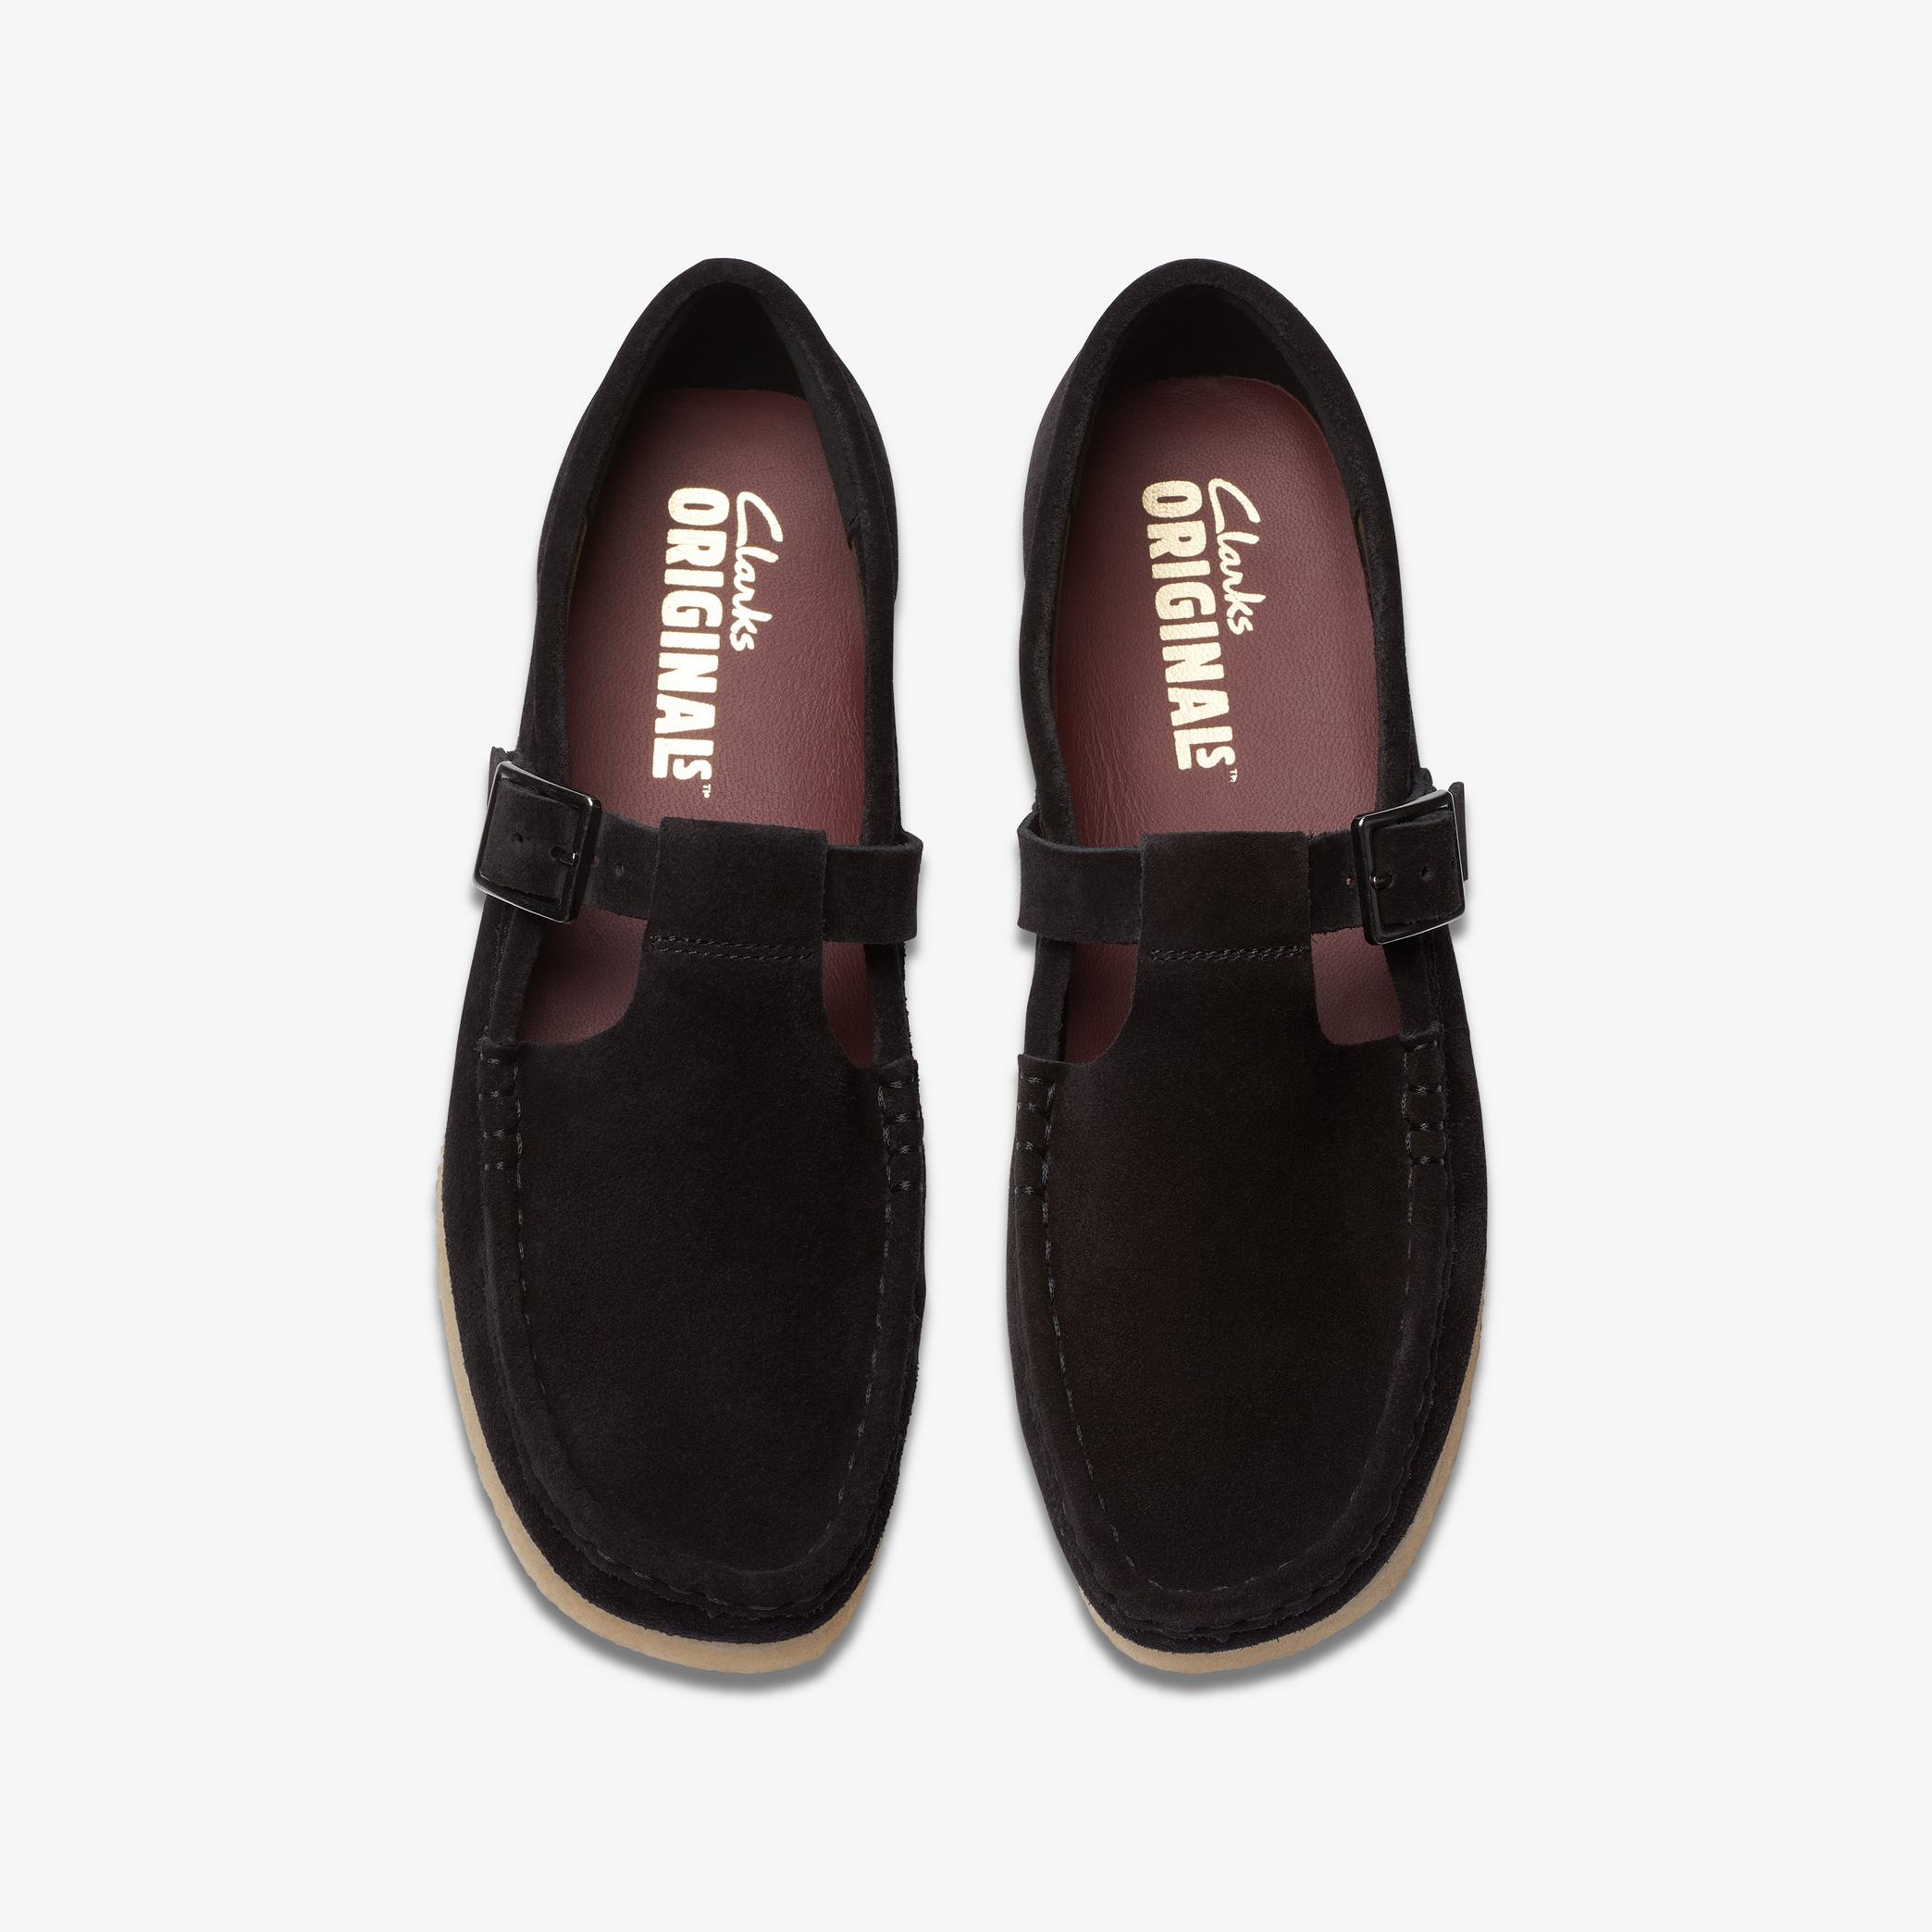 Wallabee T Bar Black Suede Loafers, view 6 of 6